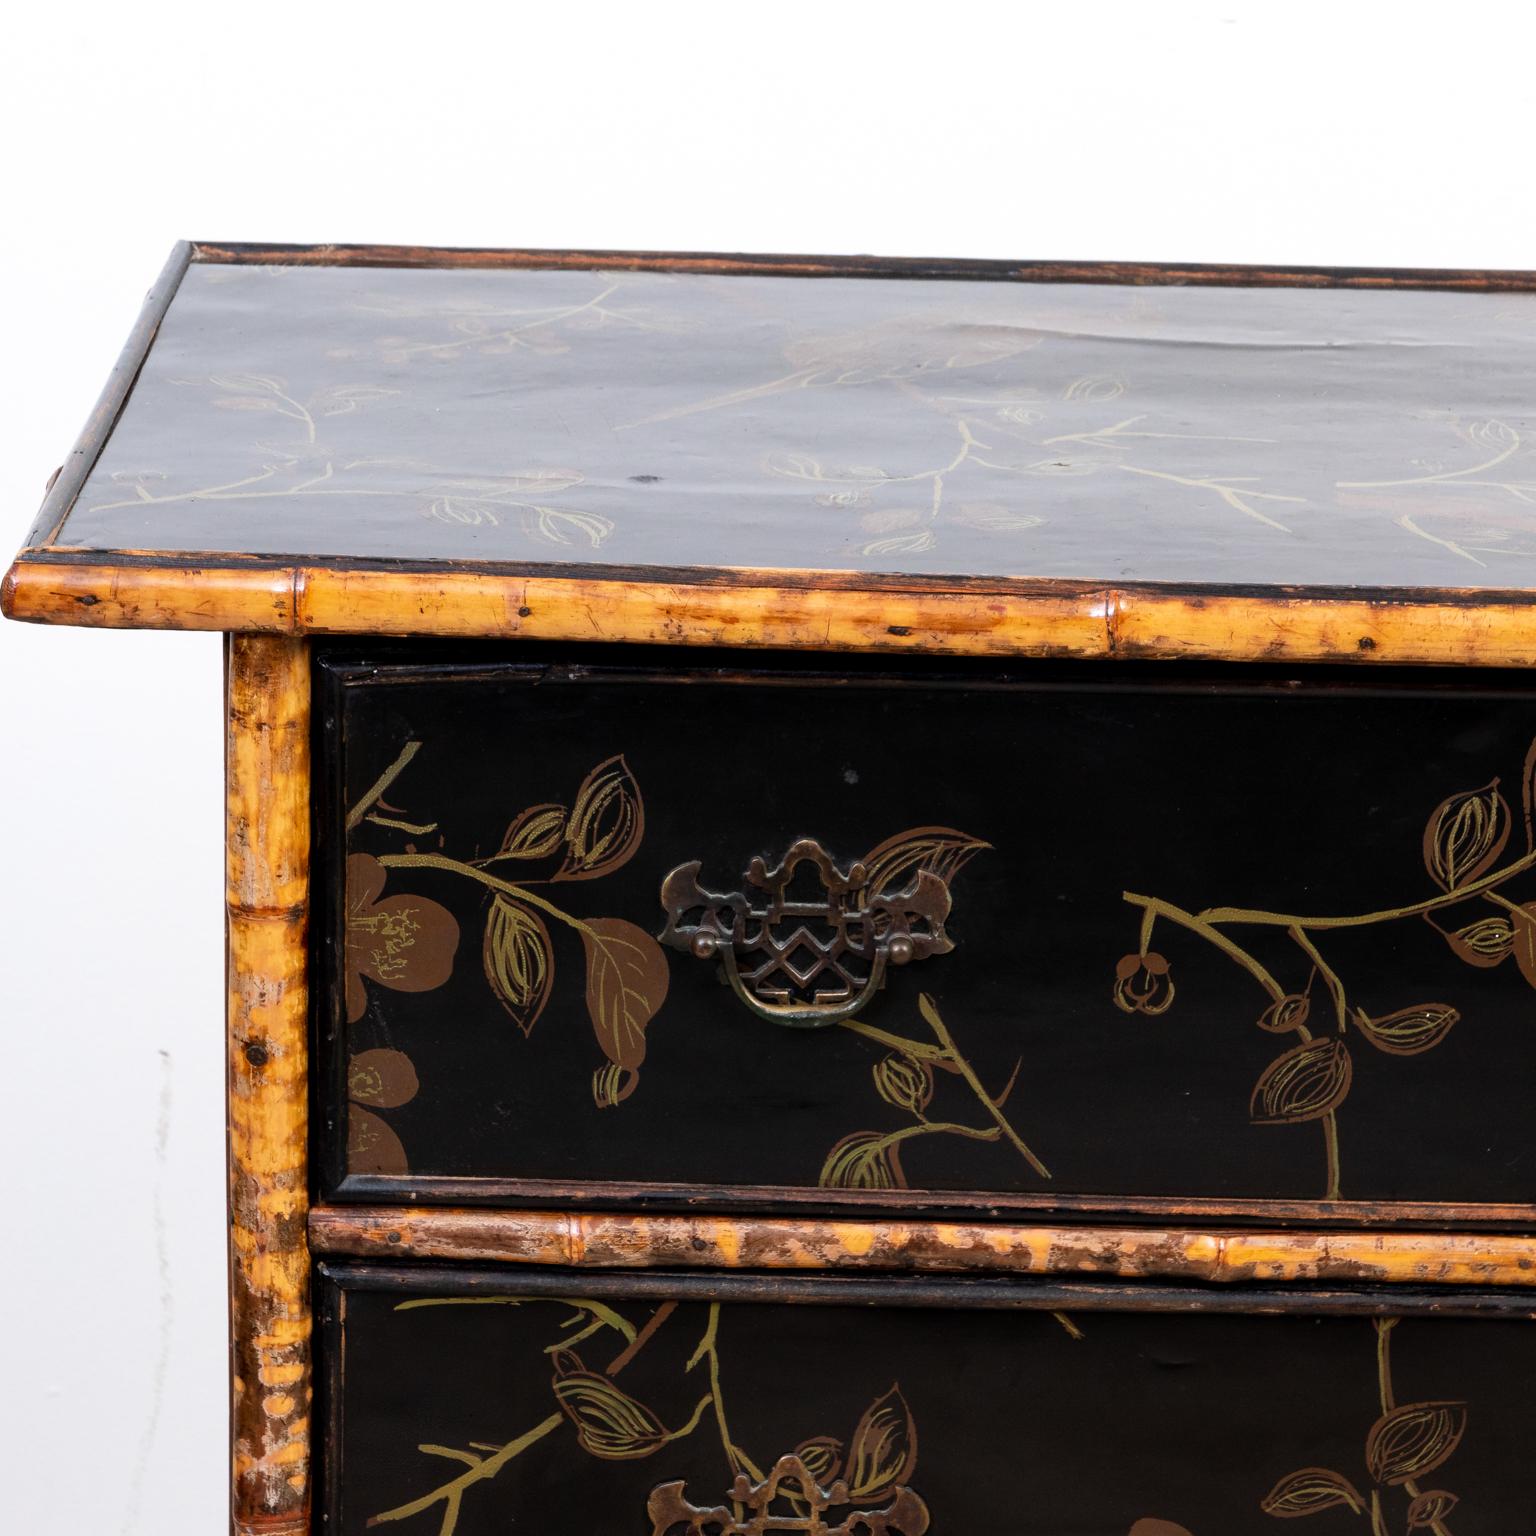 Circa 1870s English Chinoiserie style bamboo chest of drawers in a black lacquered finish with floral decoration on the drawer front and metal bat's wing escutcheon. Please note of wear consistent with age.